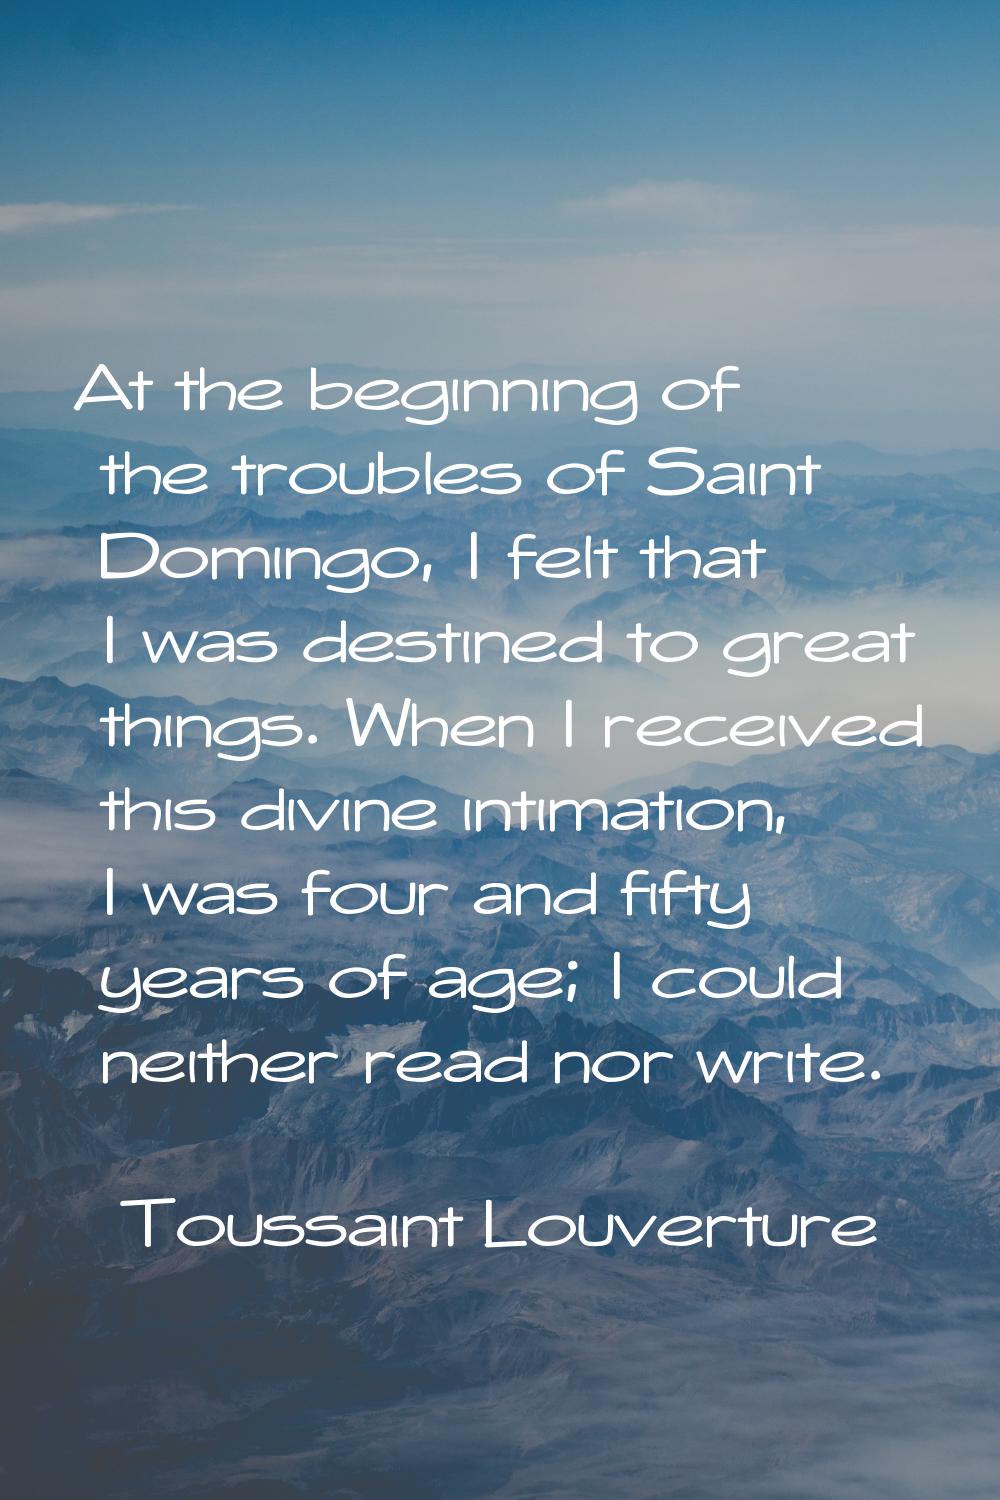 At the beginning of the troubles of Saint Domingo, I felt that I was destined to great things. When